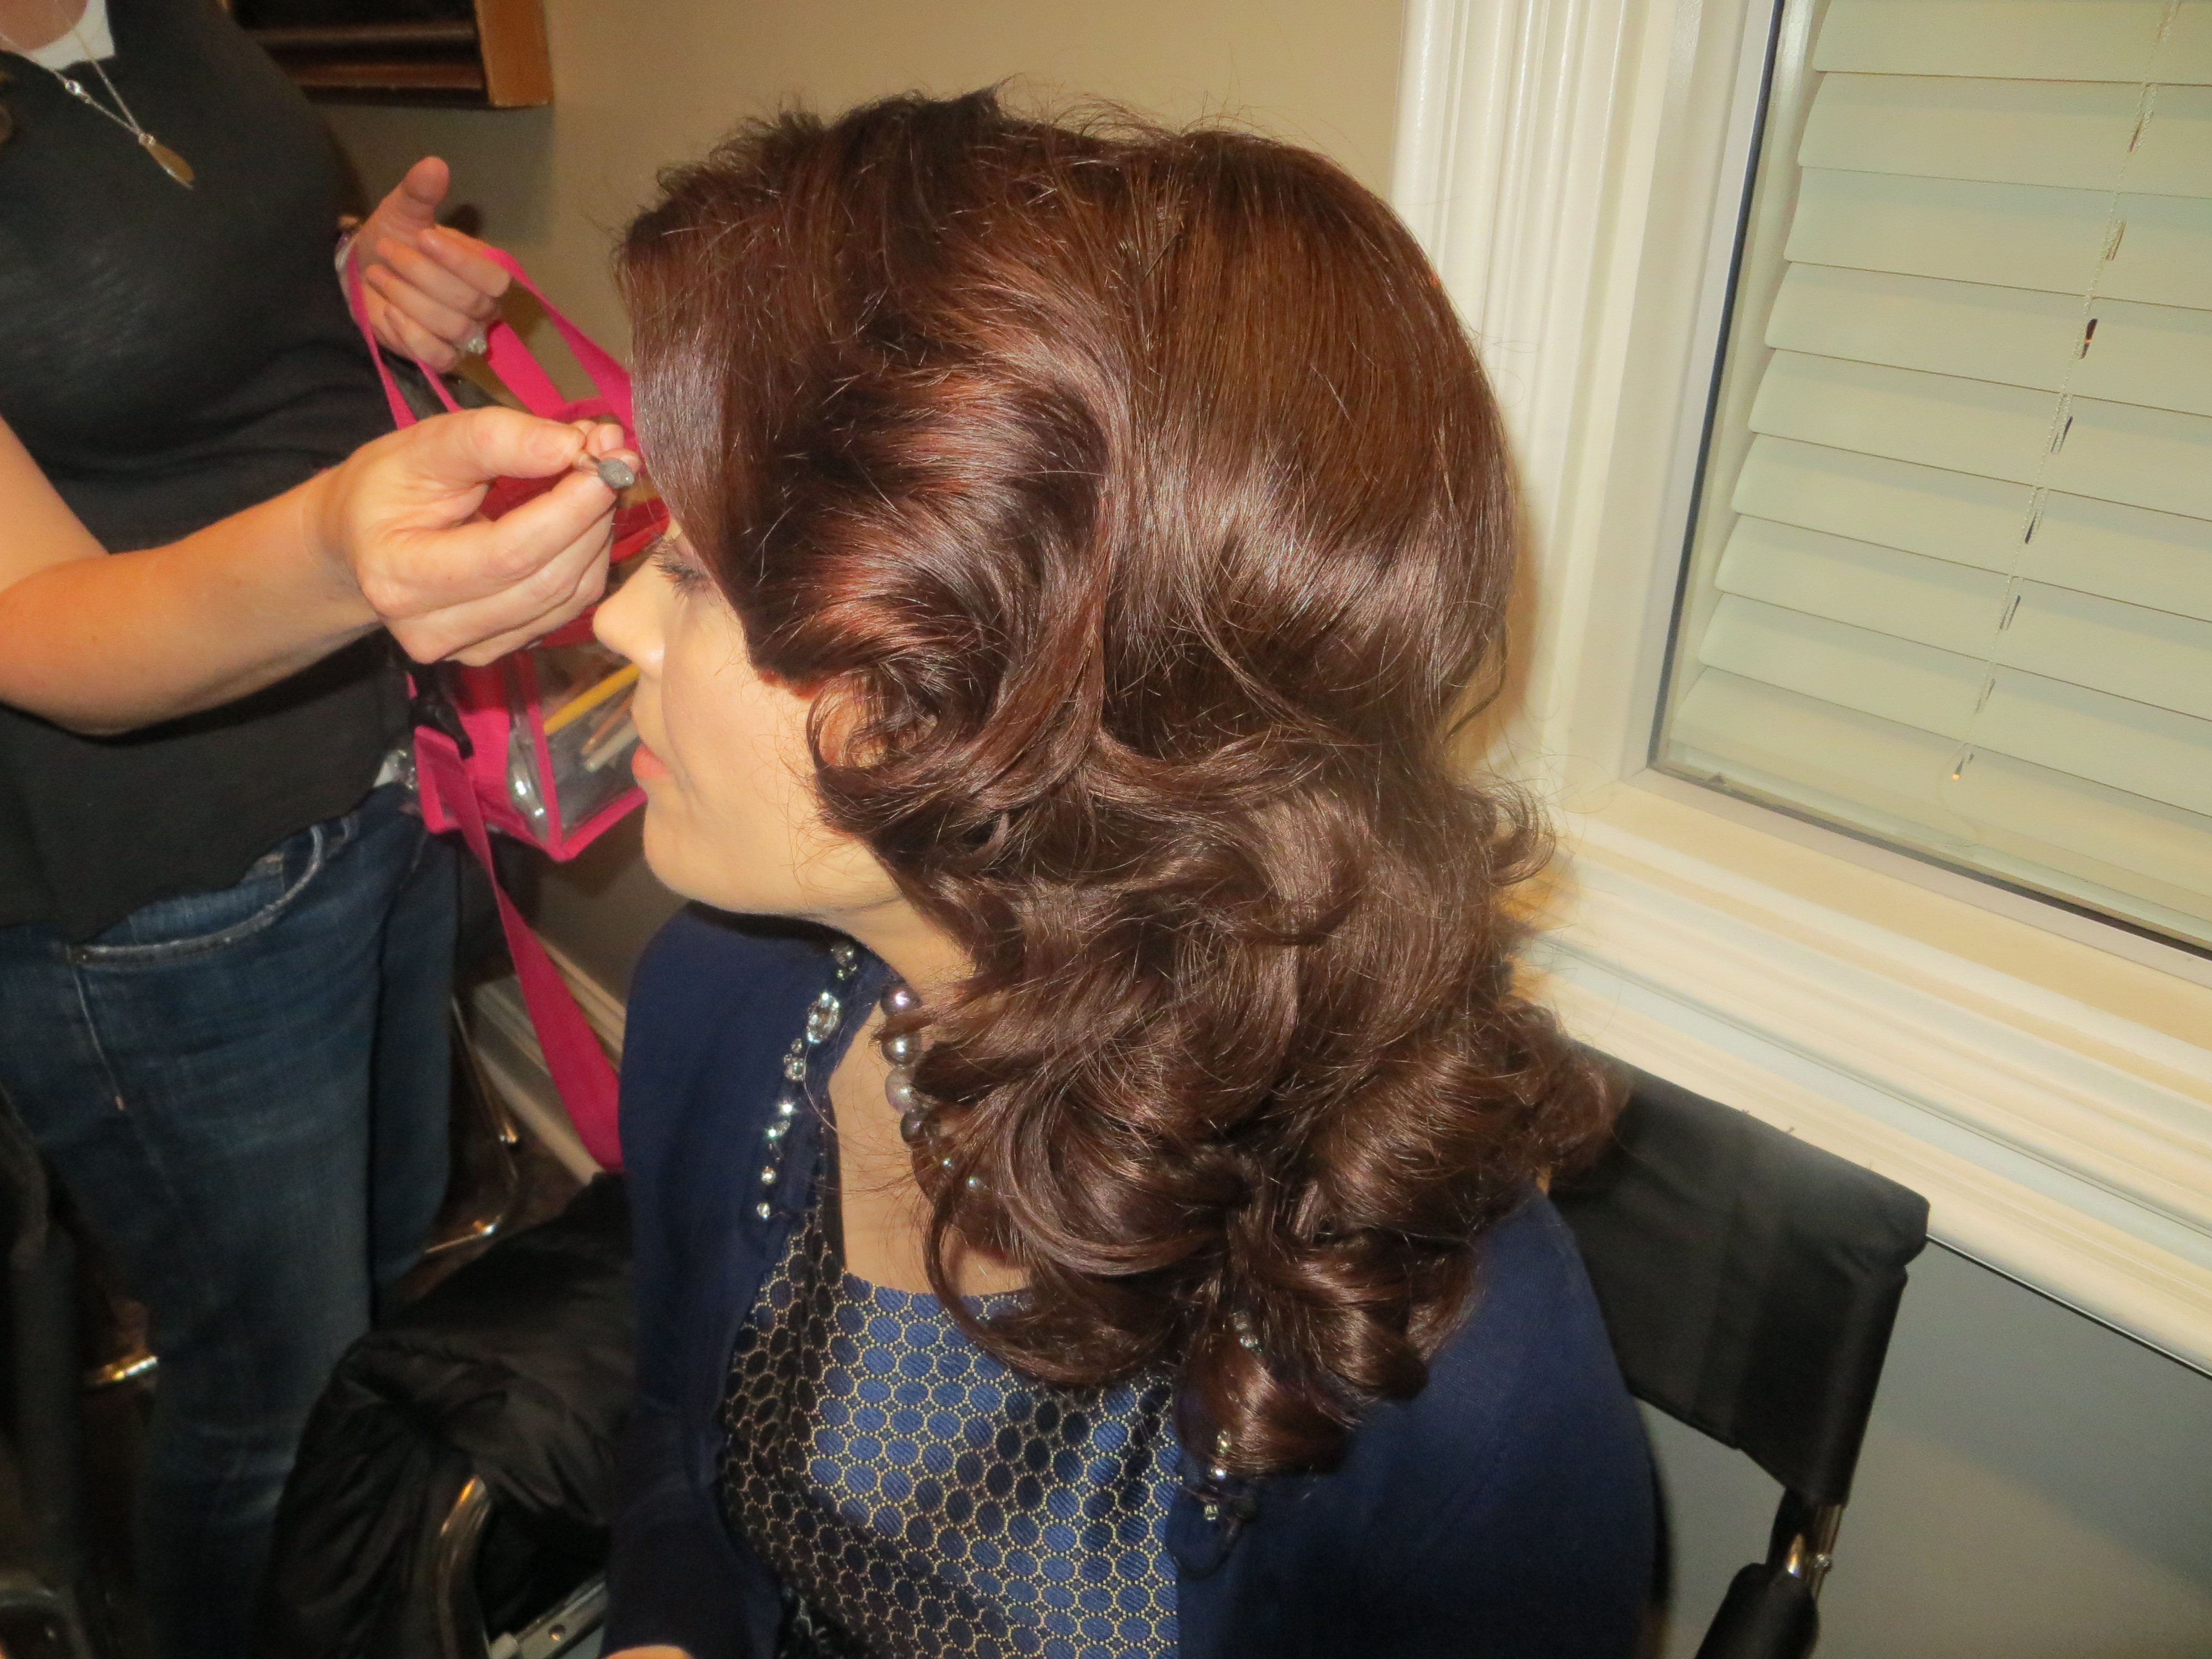 Bellamy Young behind the scenes of Scandal